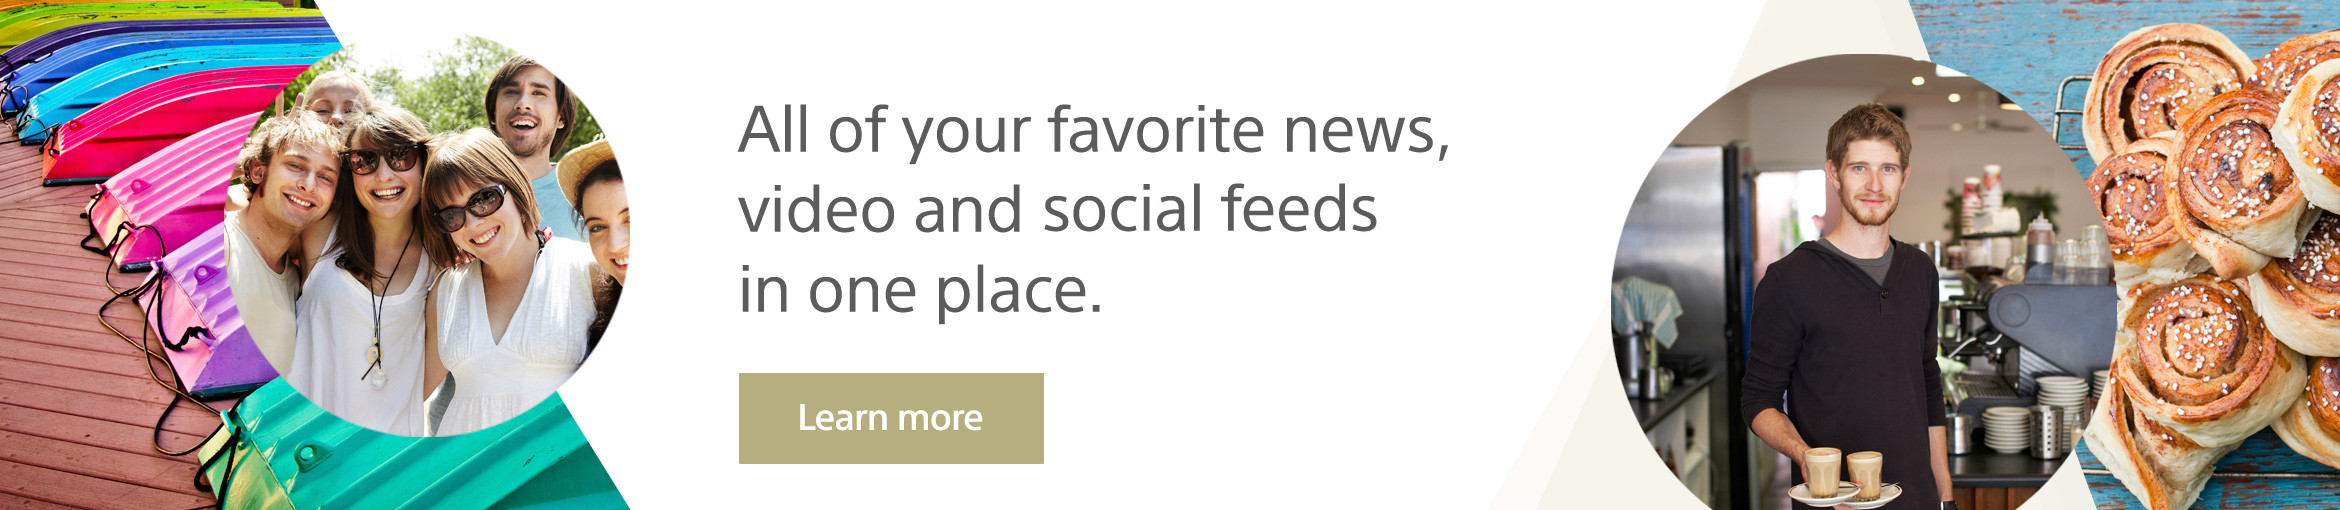 All of your favorite news, video and social feeds in one place.